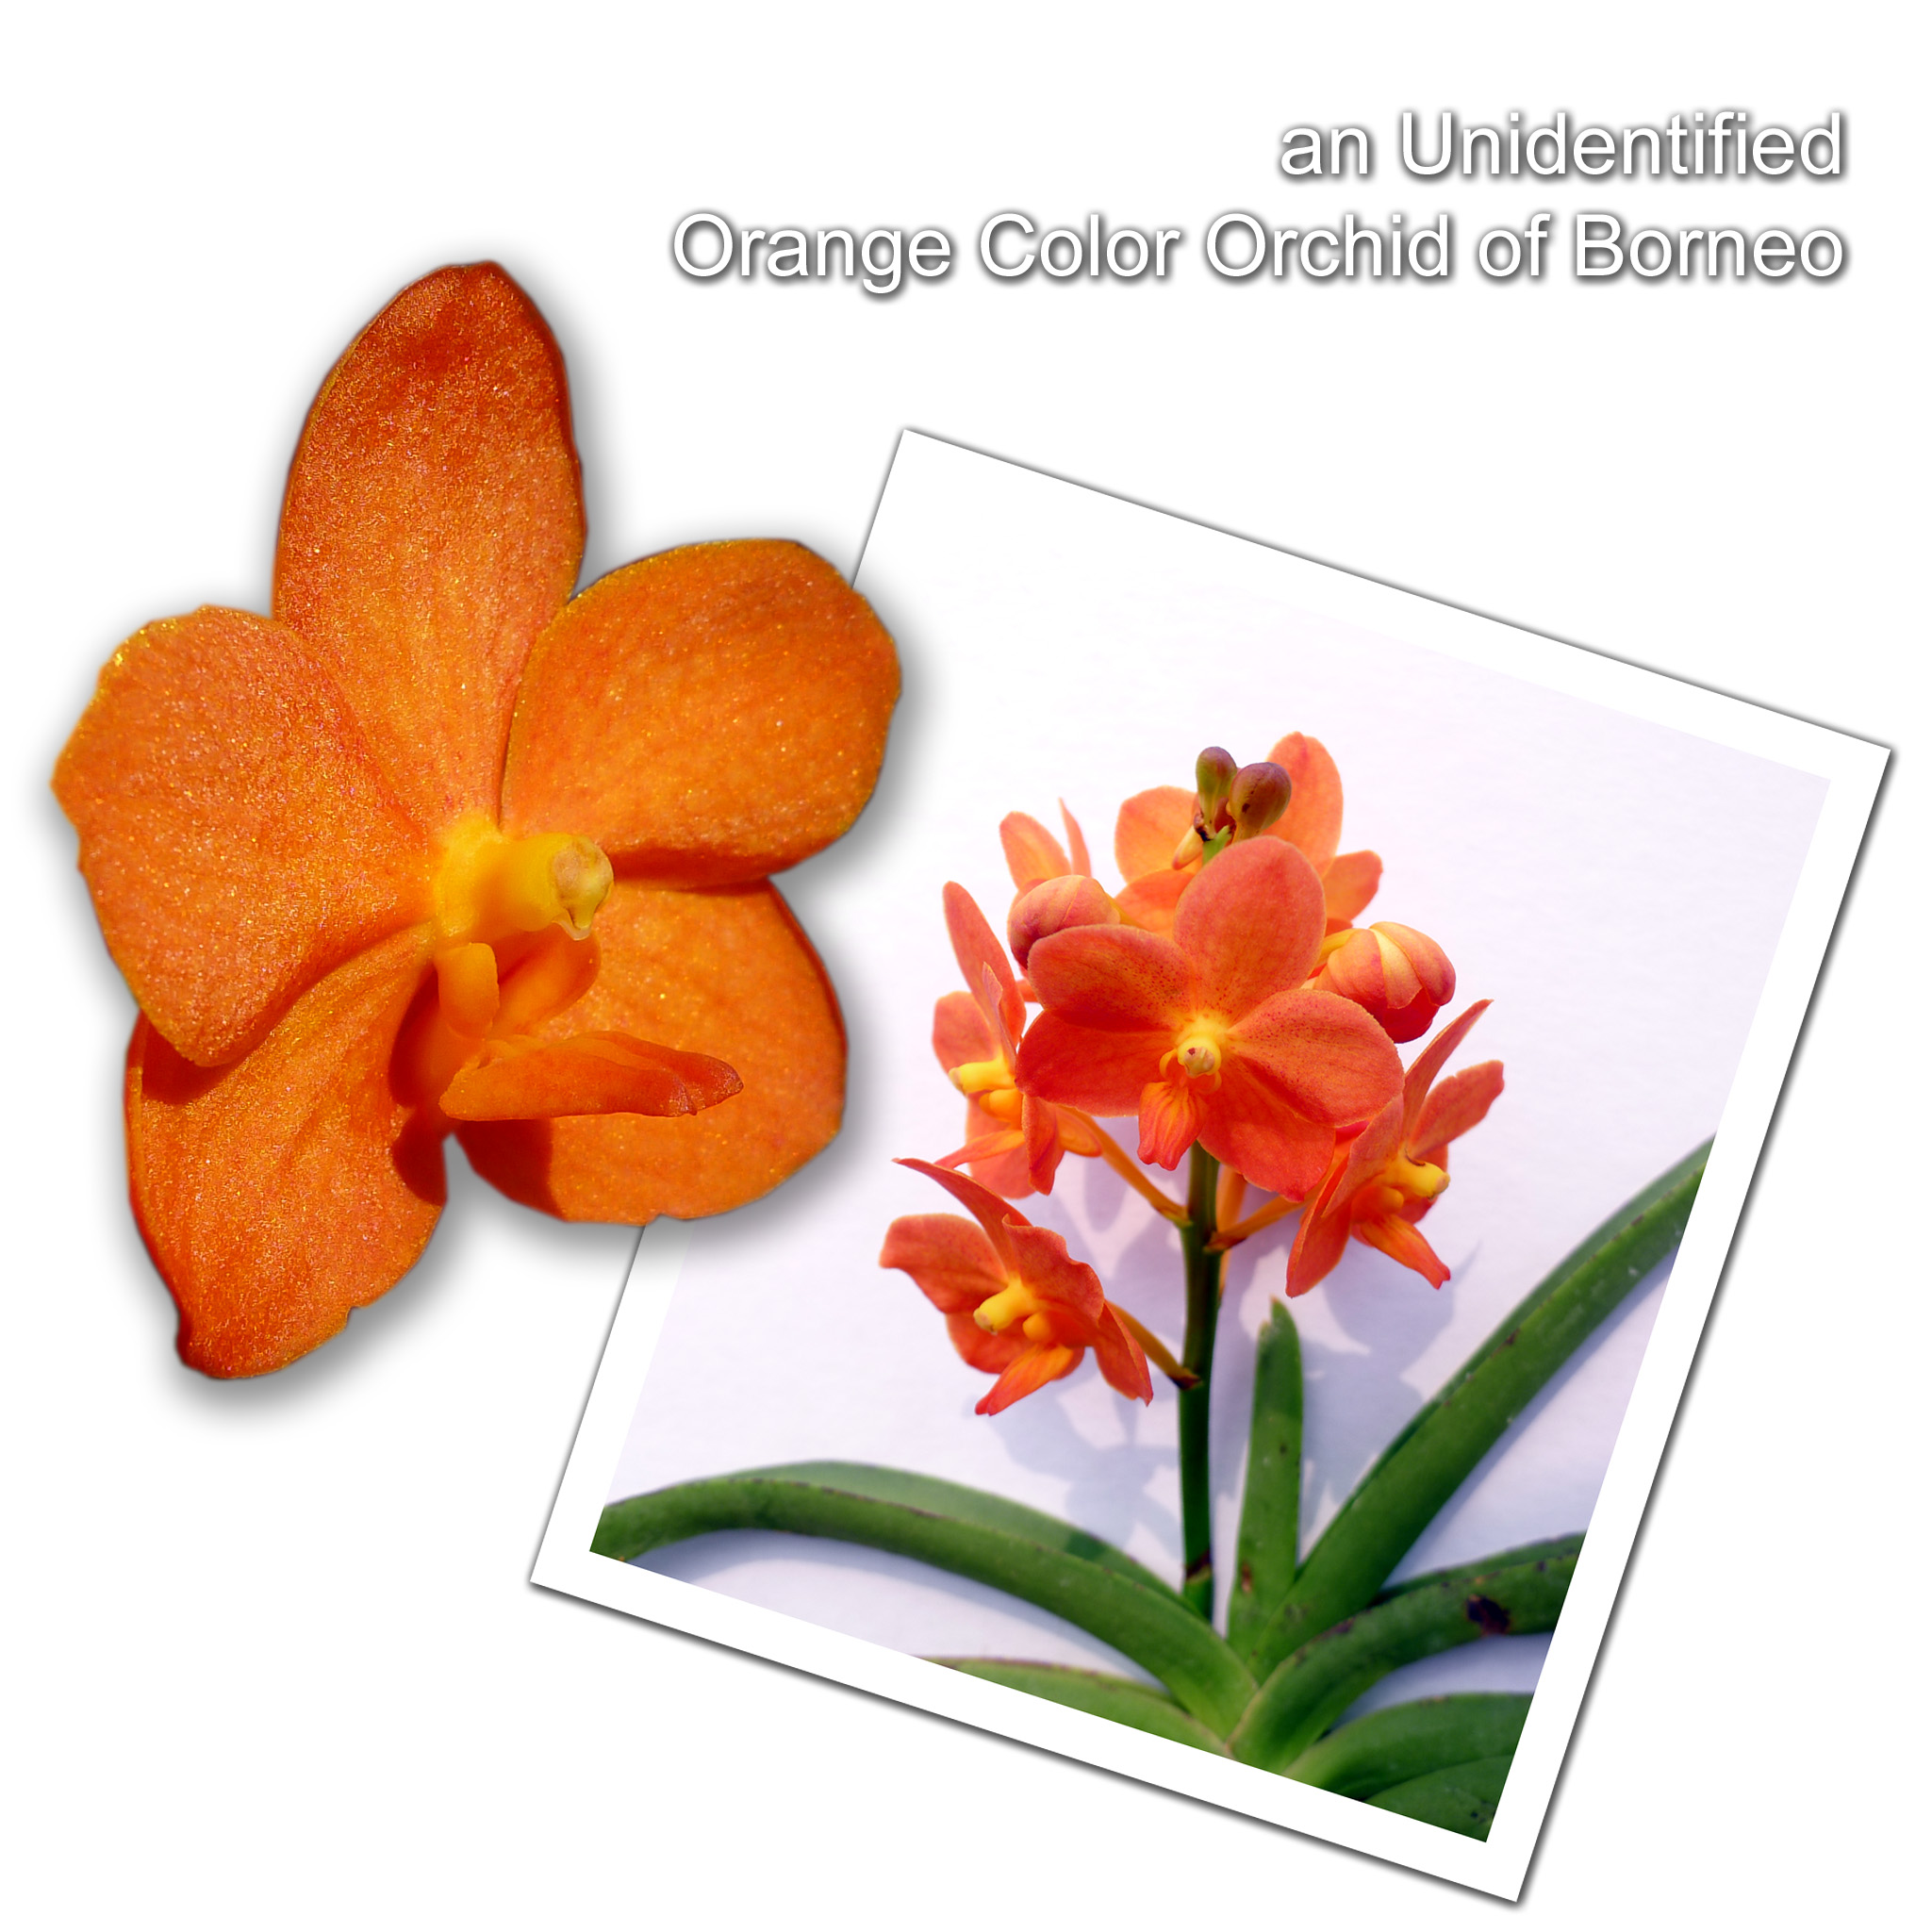 an Unidentified Orange Color Orchid of Borneo